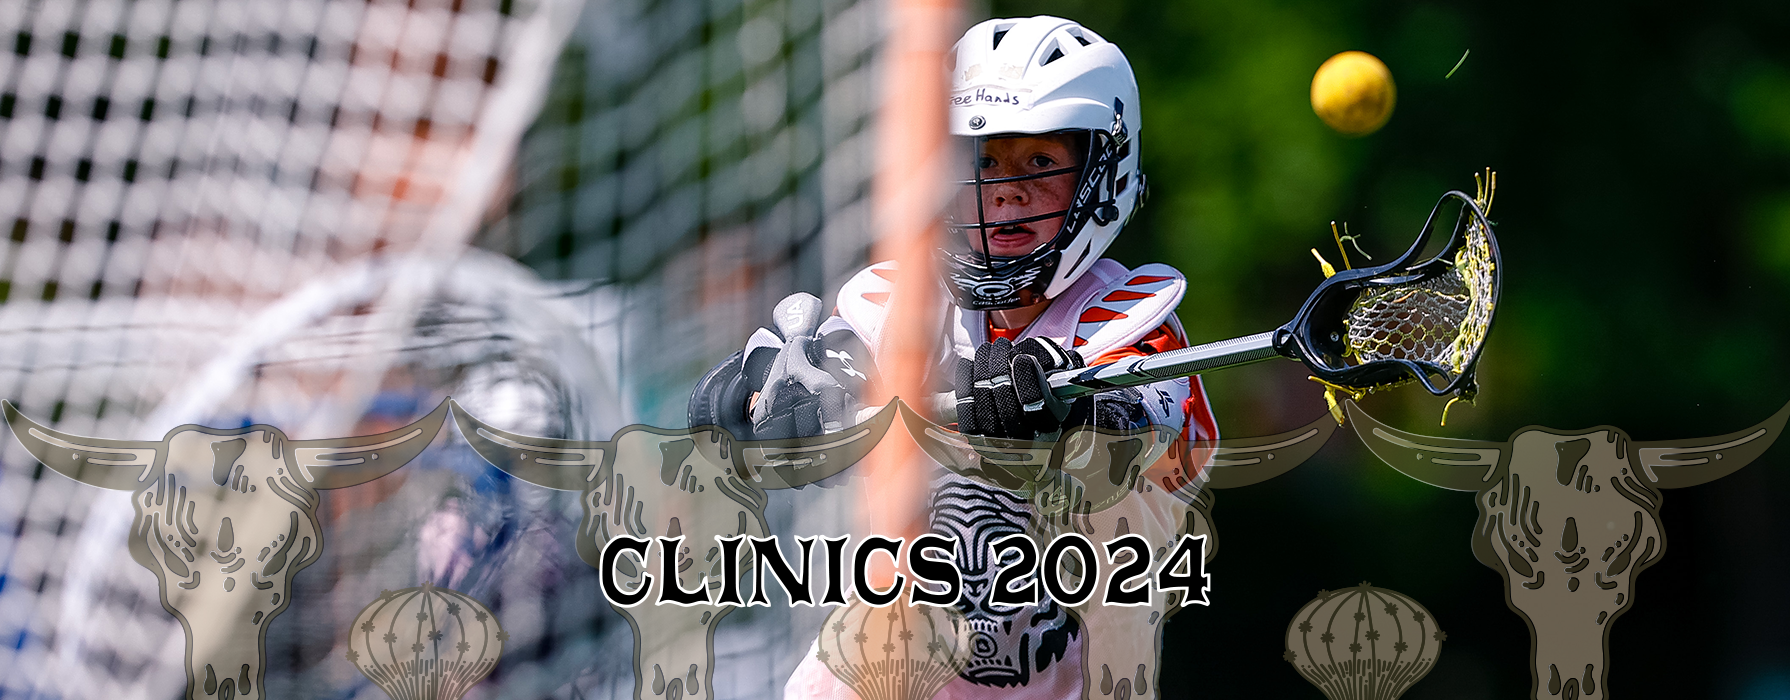 Boom Clinic 2024 Promo 8.png